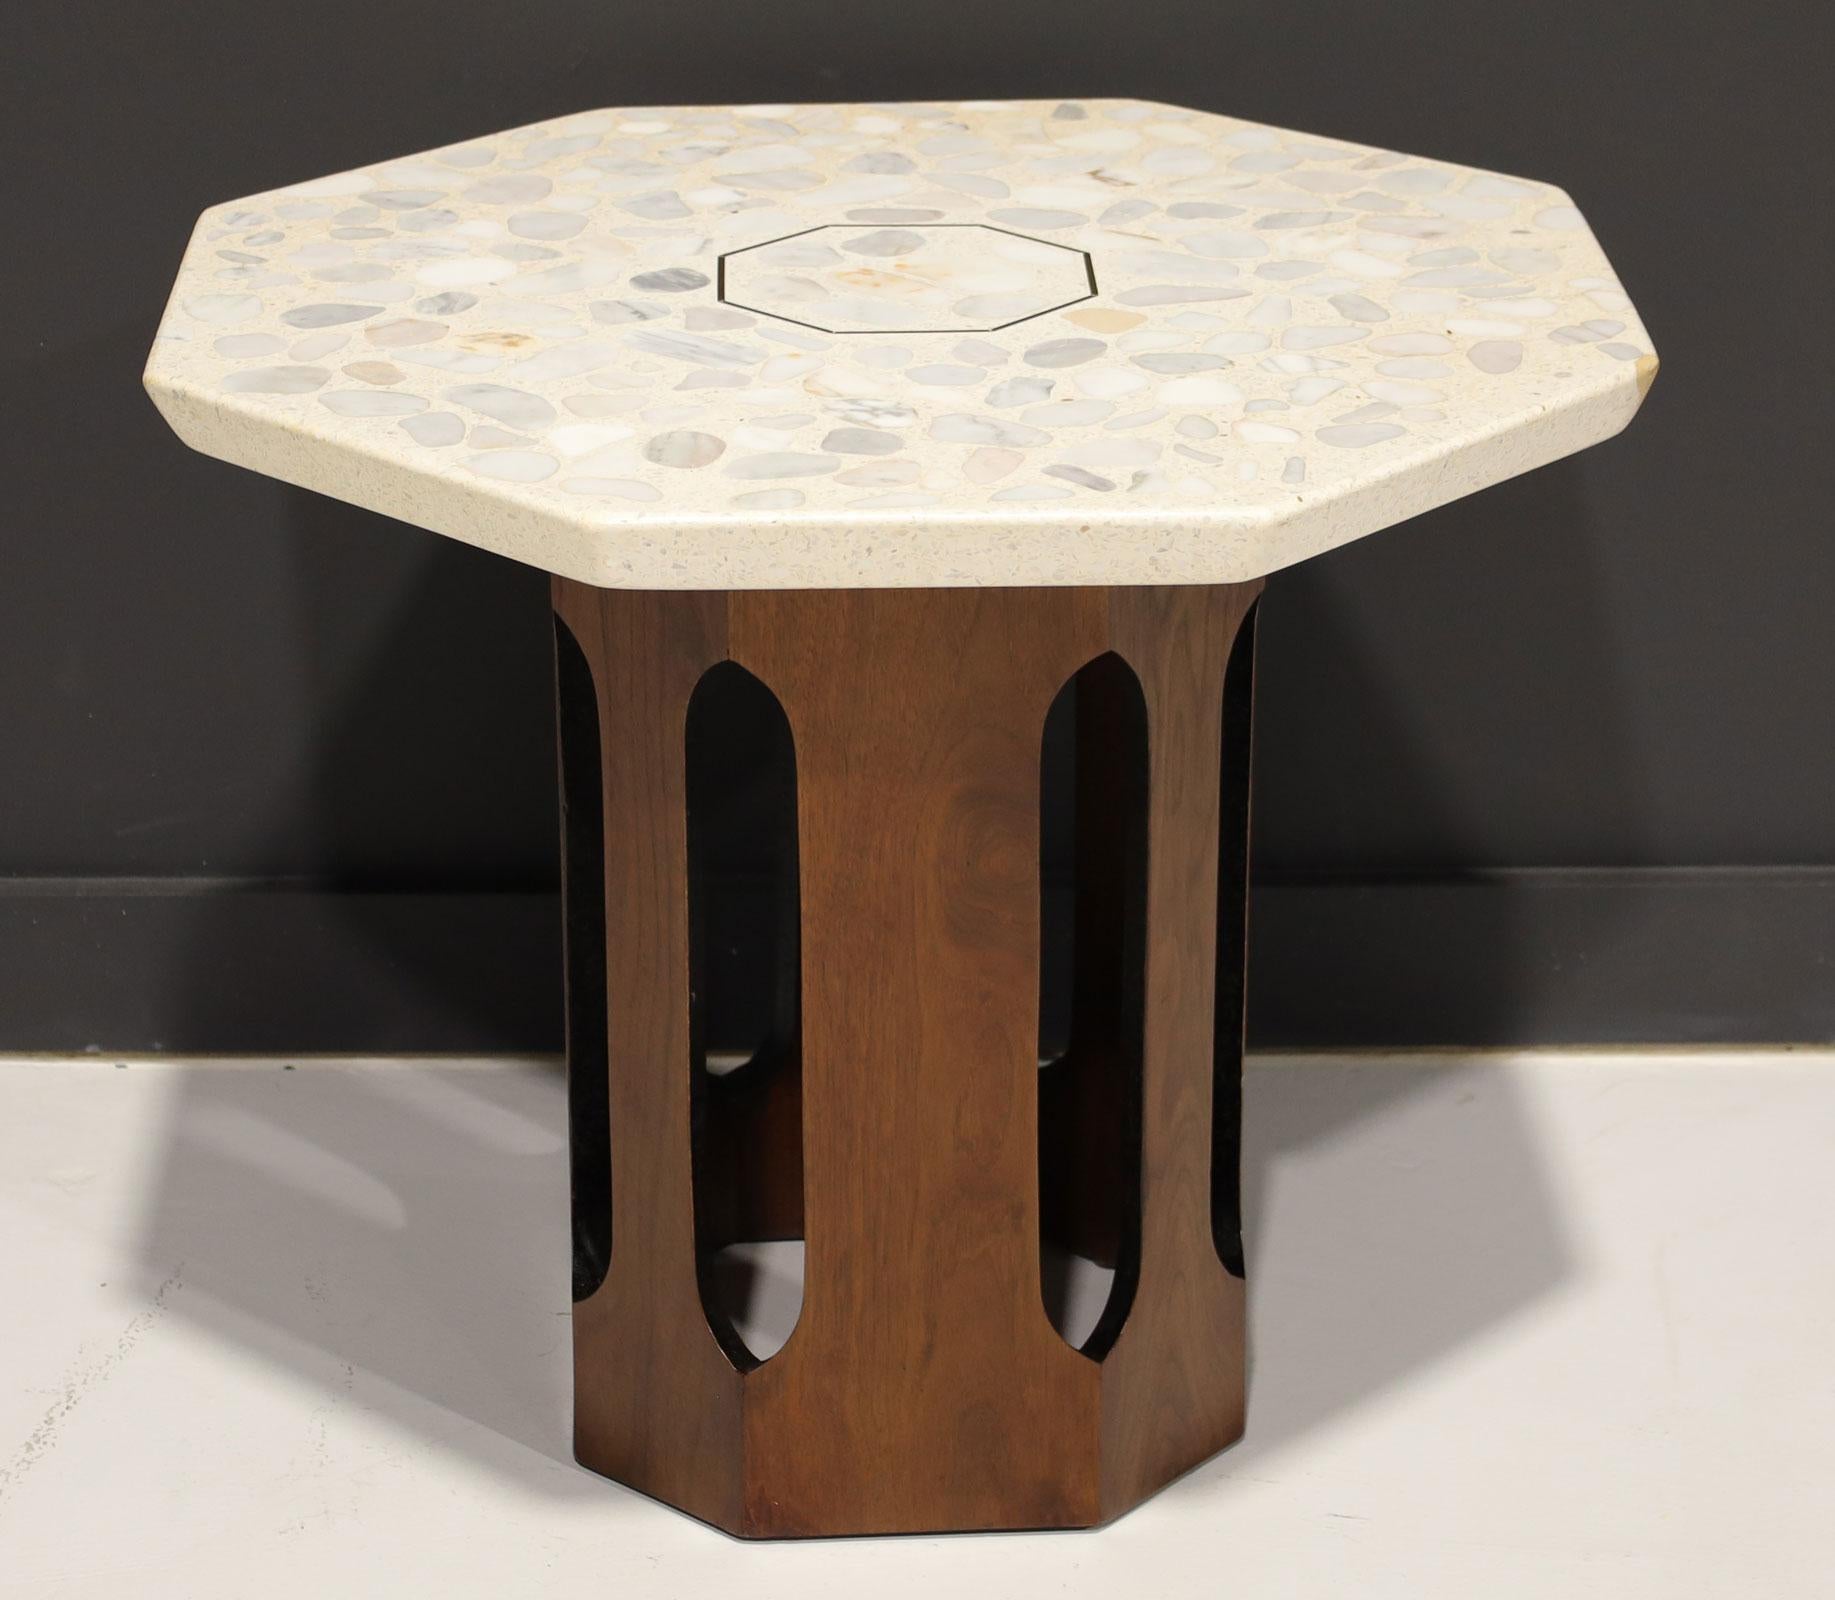 An iconic side table by Harvey Probber. A thick terrazzo top with a brass inlay on a walnut base. We have restored the base and polished the terrazzo.